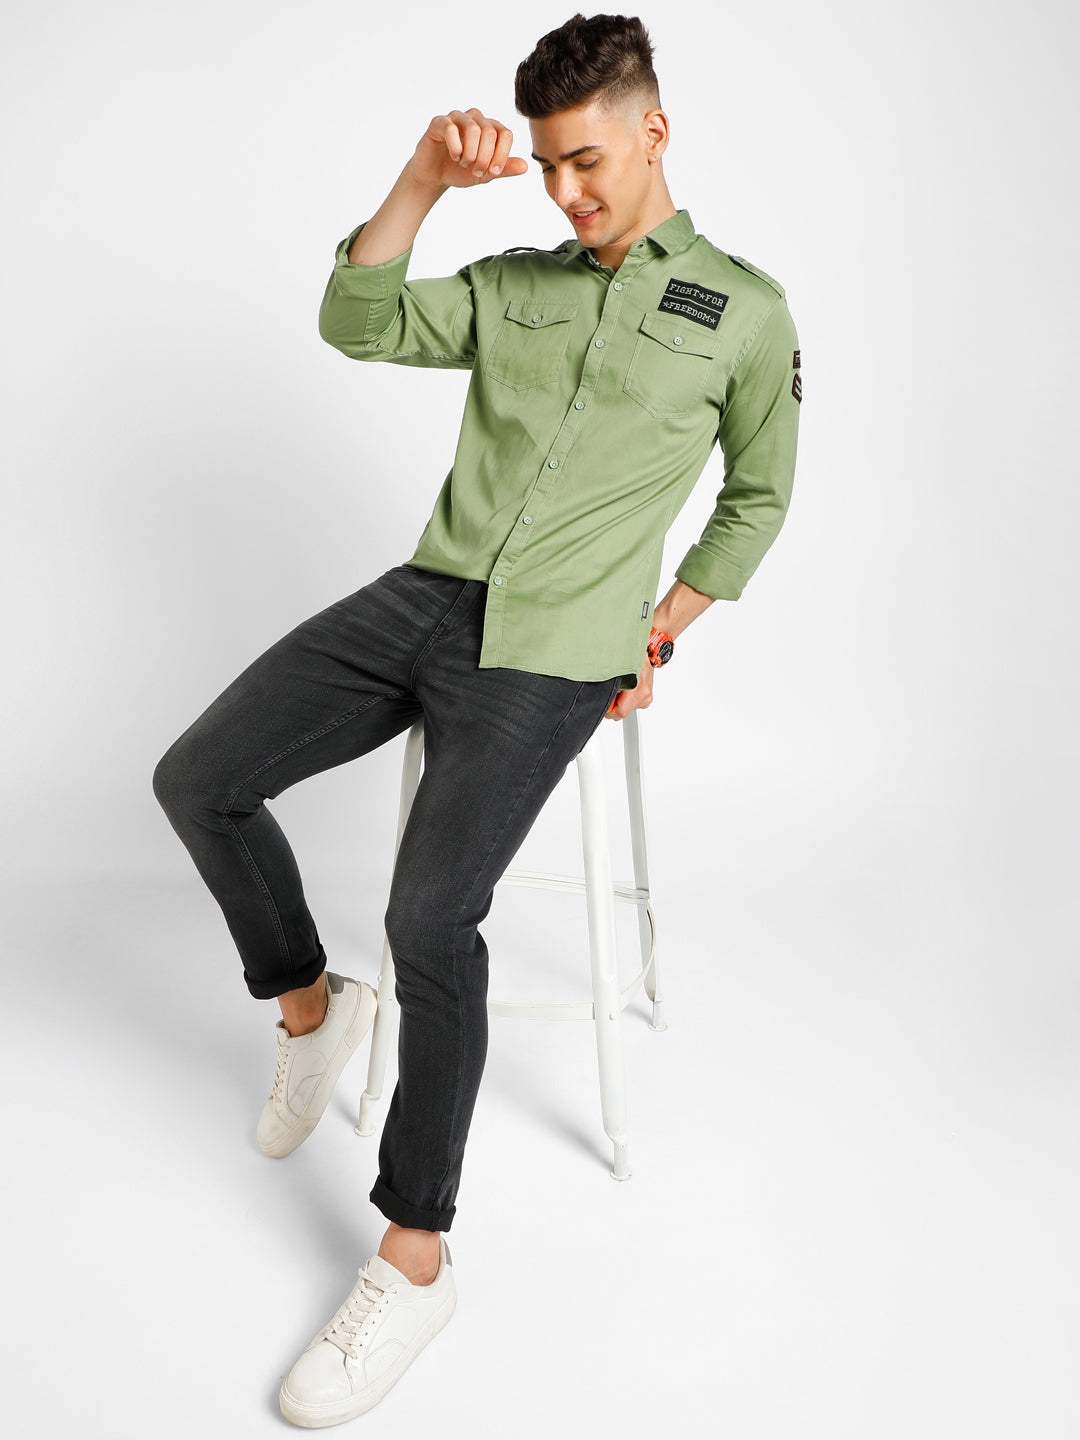 Men's Green Cotton Full Sleeve Slim Fit Casual Solid Shirt